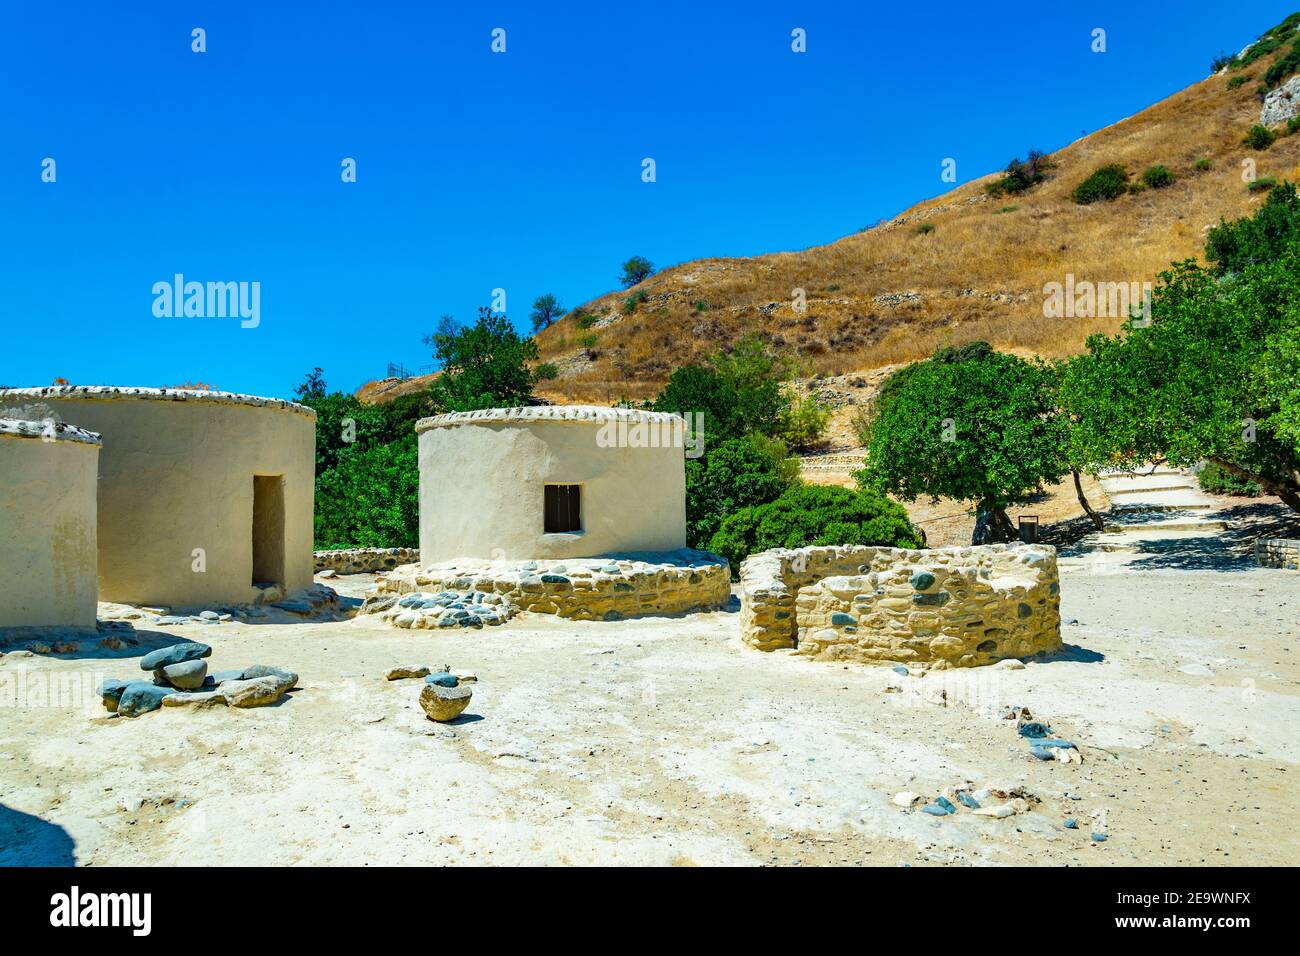 Reconstructed neolithic dwellings at Choirokoitia, Cyprus Stock Photo